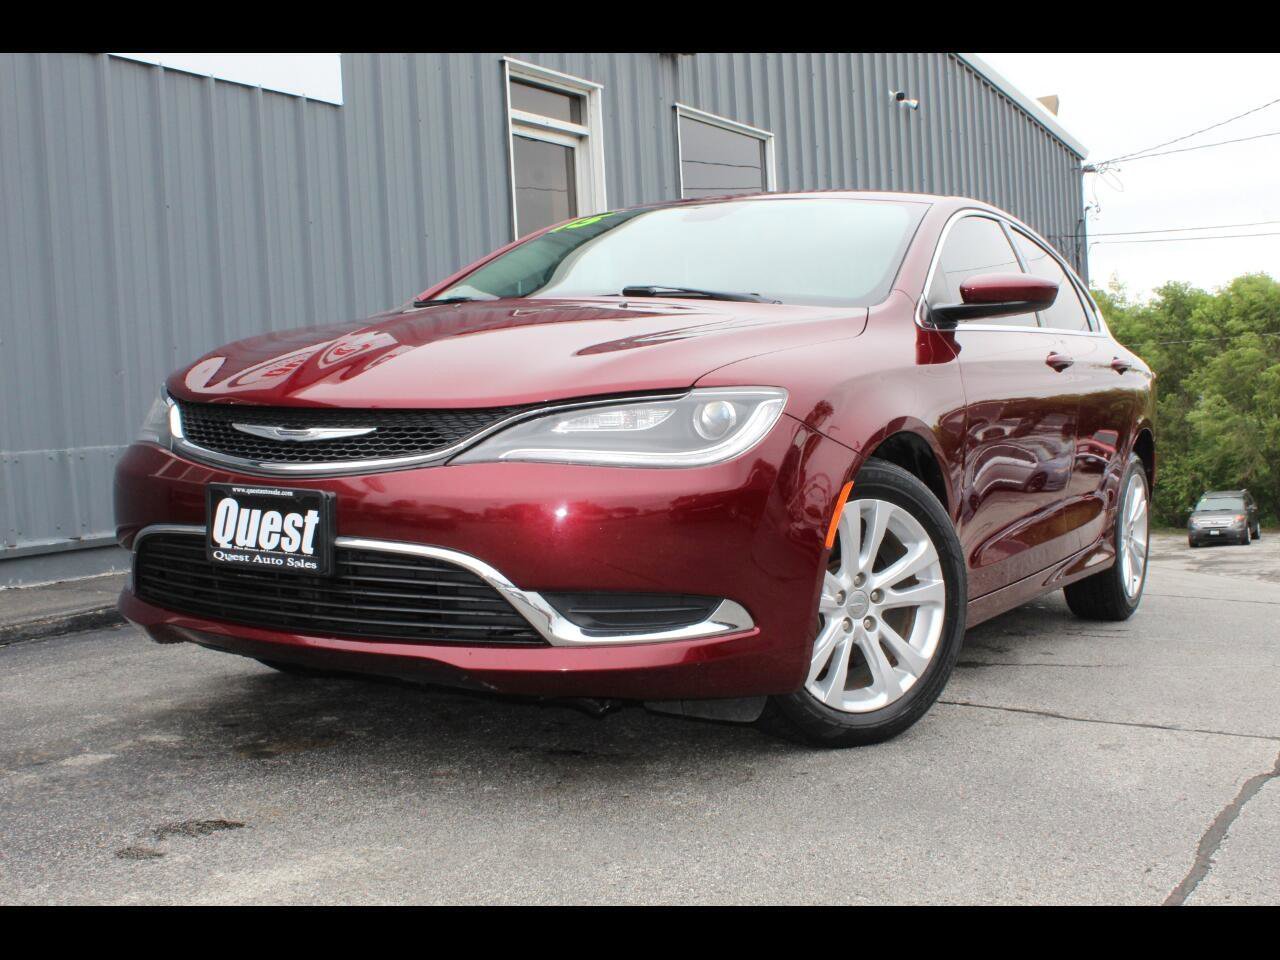 Used 2015 Chrysler 200 for Sale Right Now - Autotrader